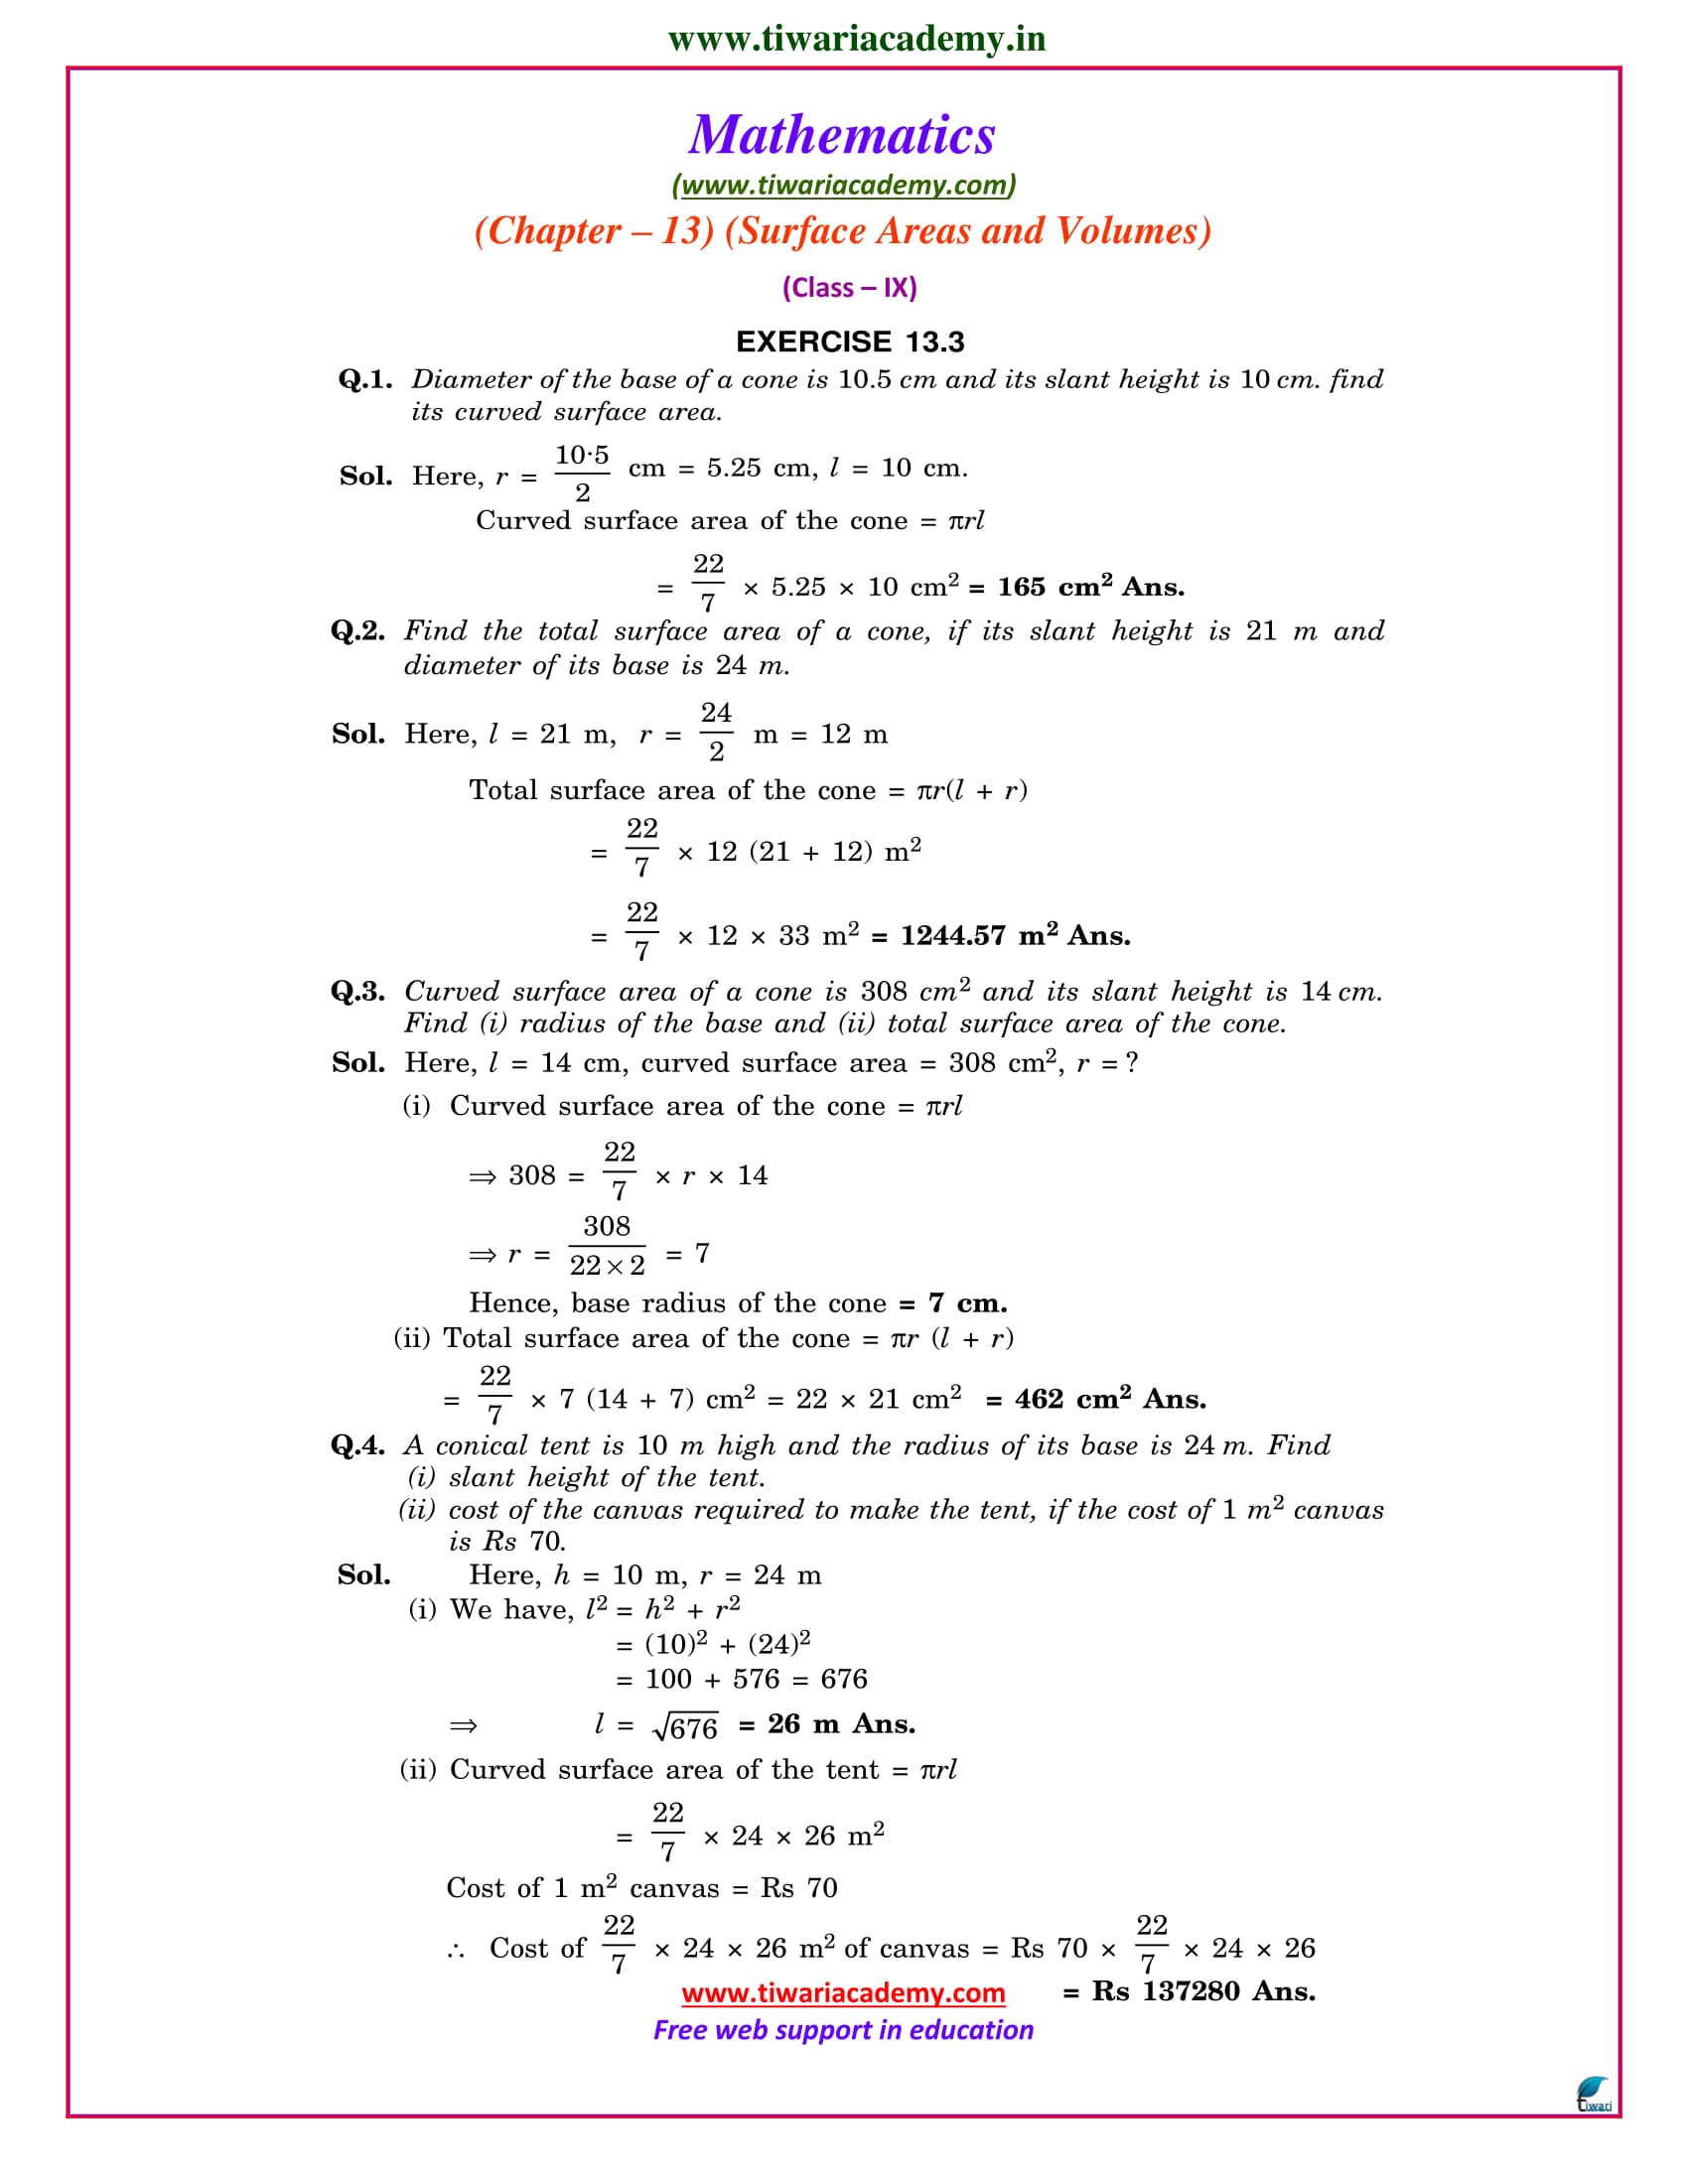 NCERT Solutions for Class 9 Maths Chapter 13 Exercise 13.3 